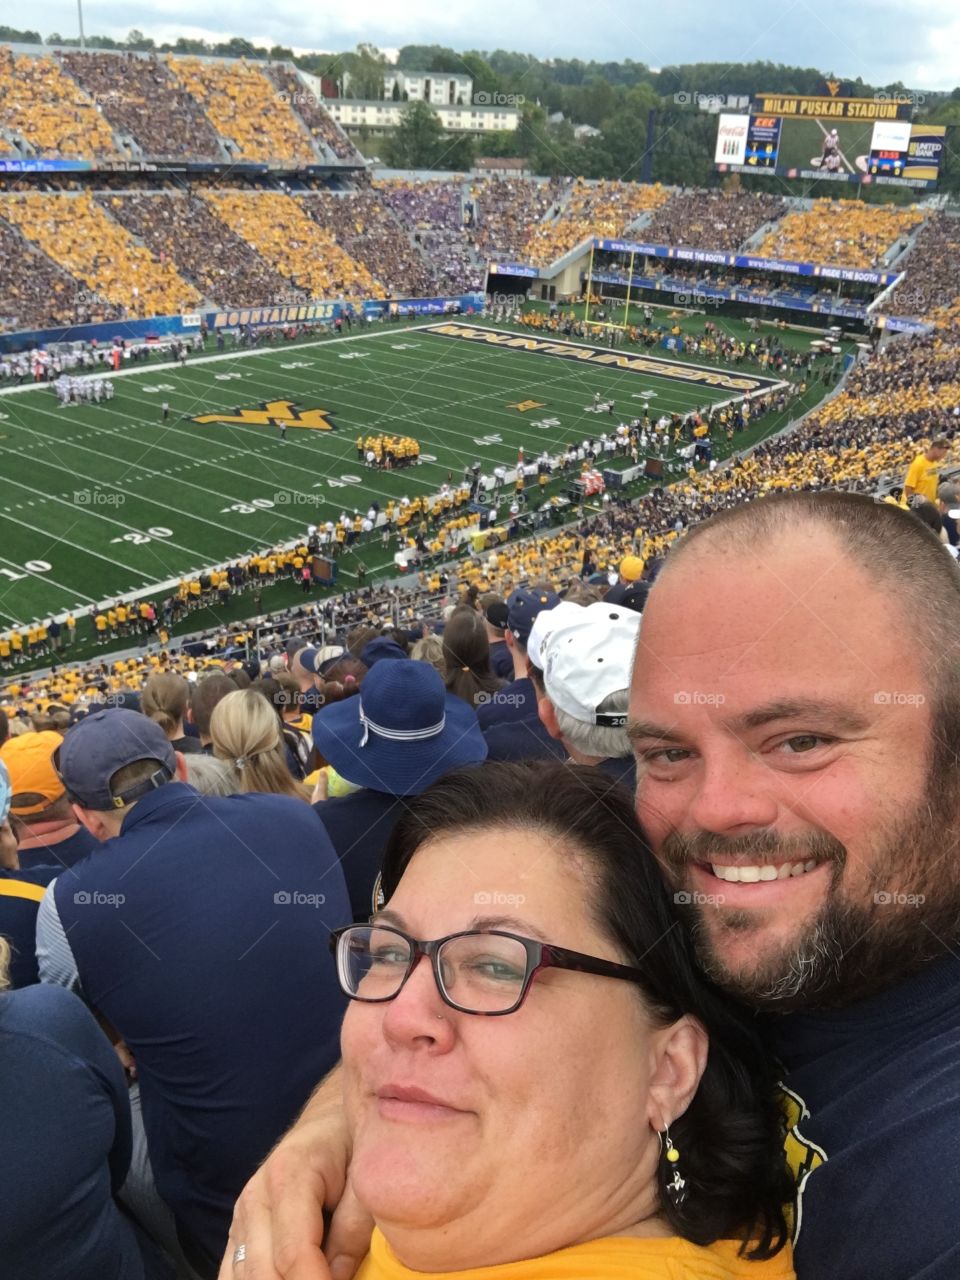 Cheering on the Mountaineers!